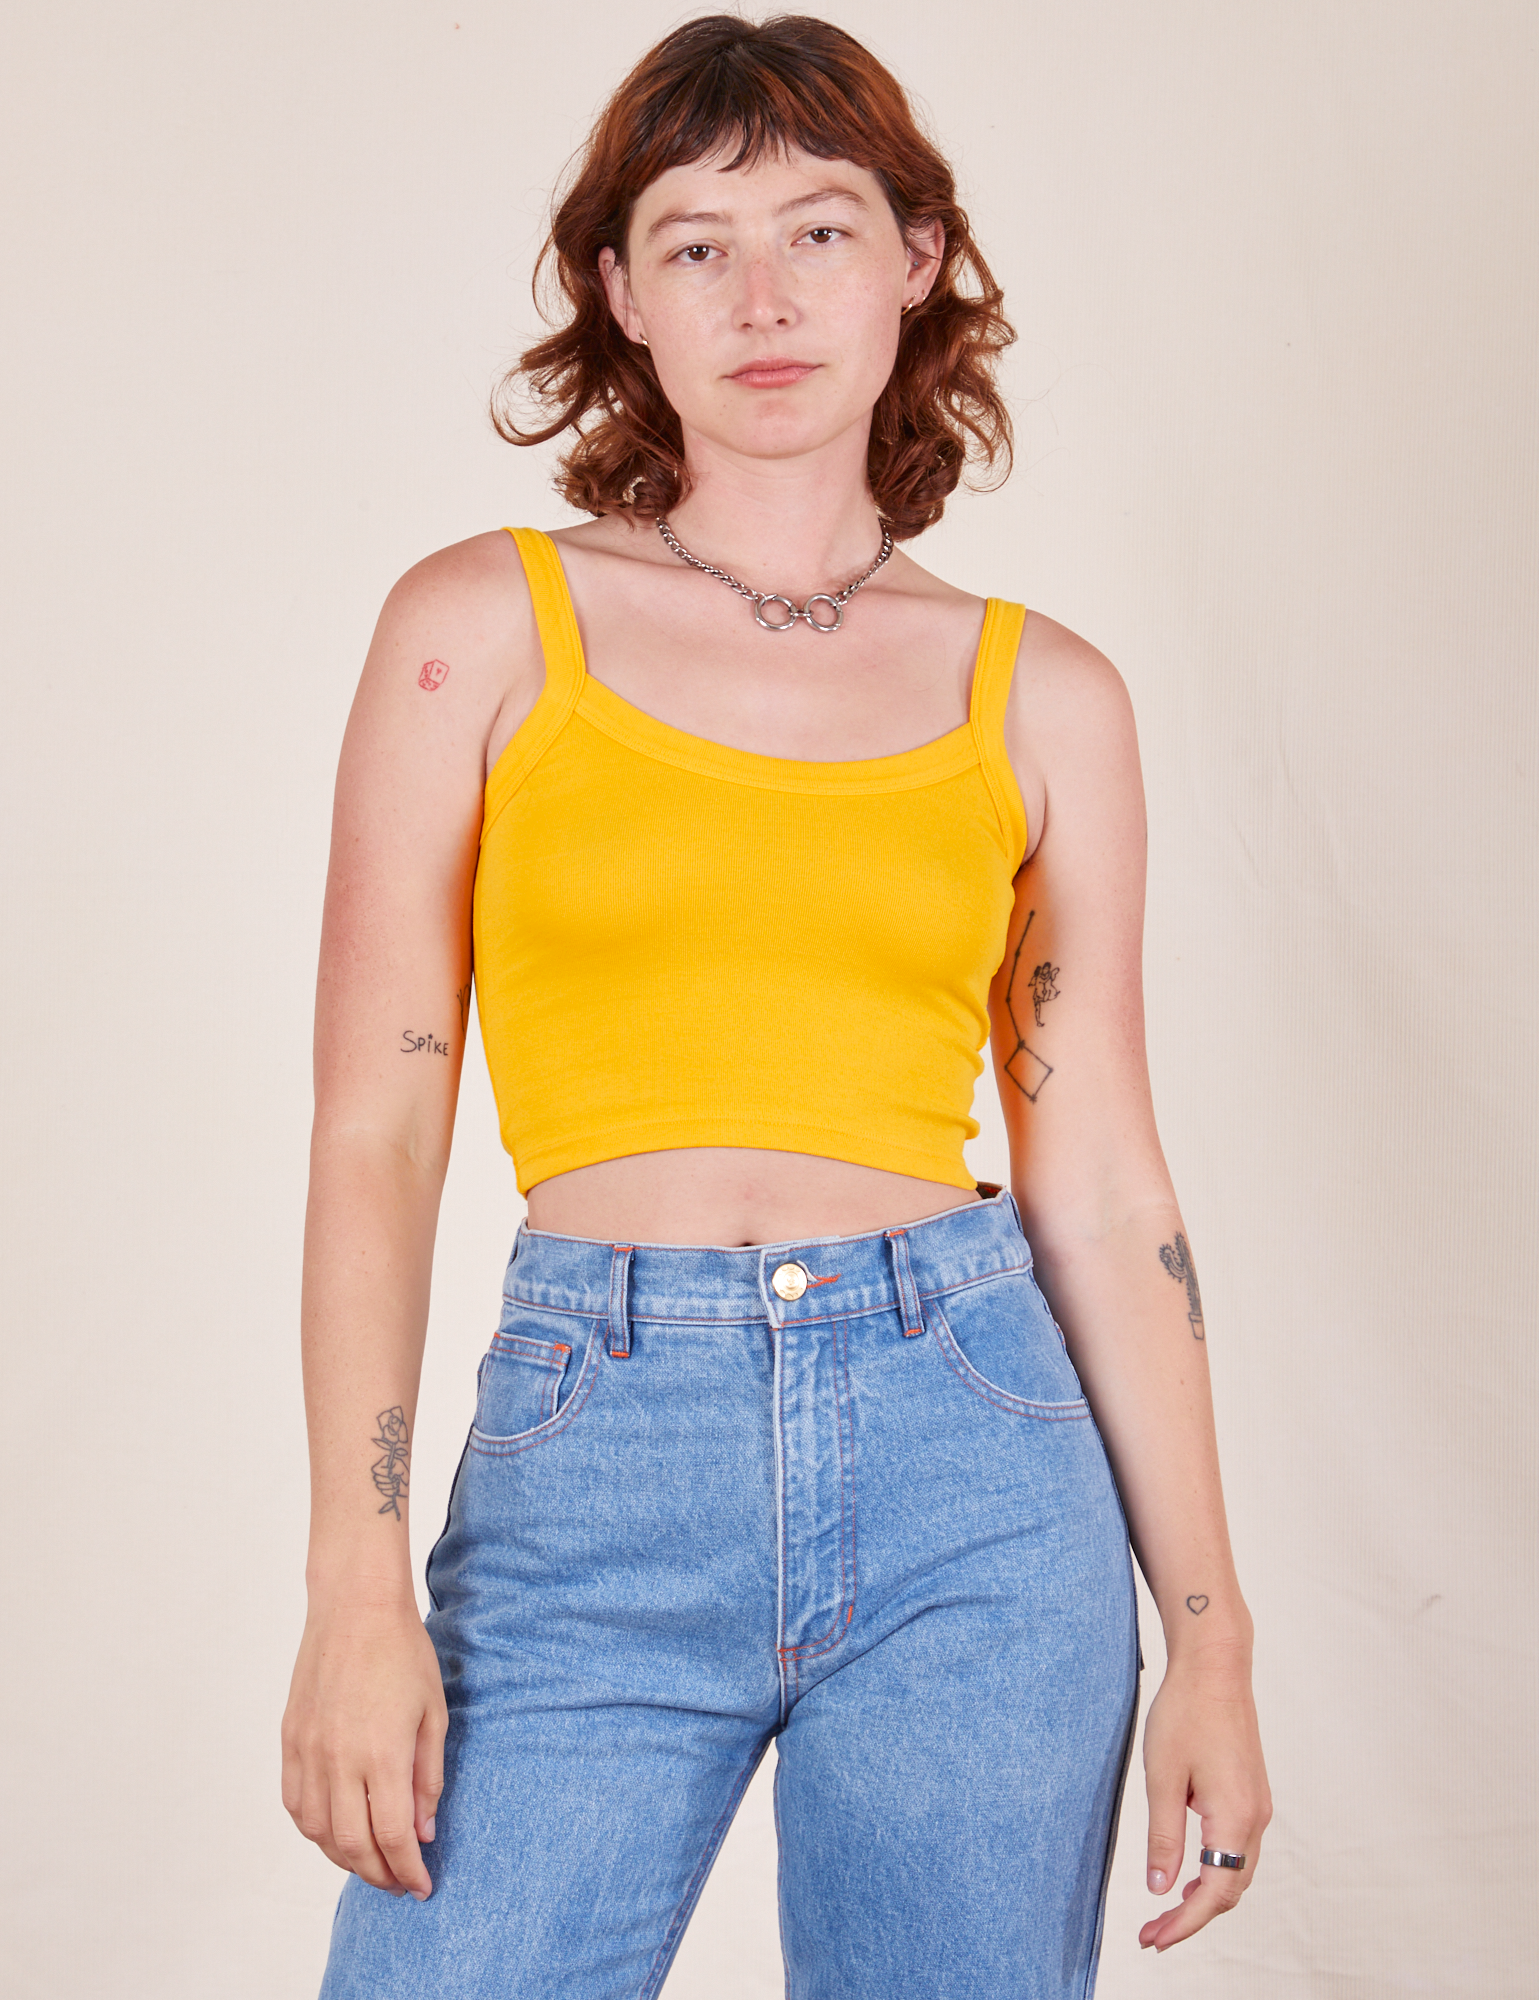 Alex is 5&#39;8&quot; and wearing P Cropped Cami in Sunshine Yellow paired with light wash Frontier Jeans